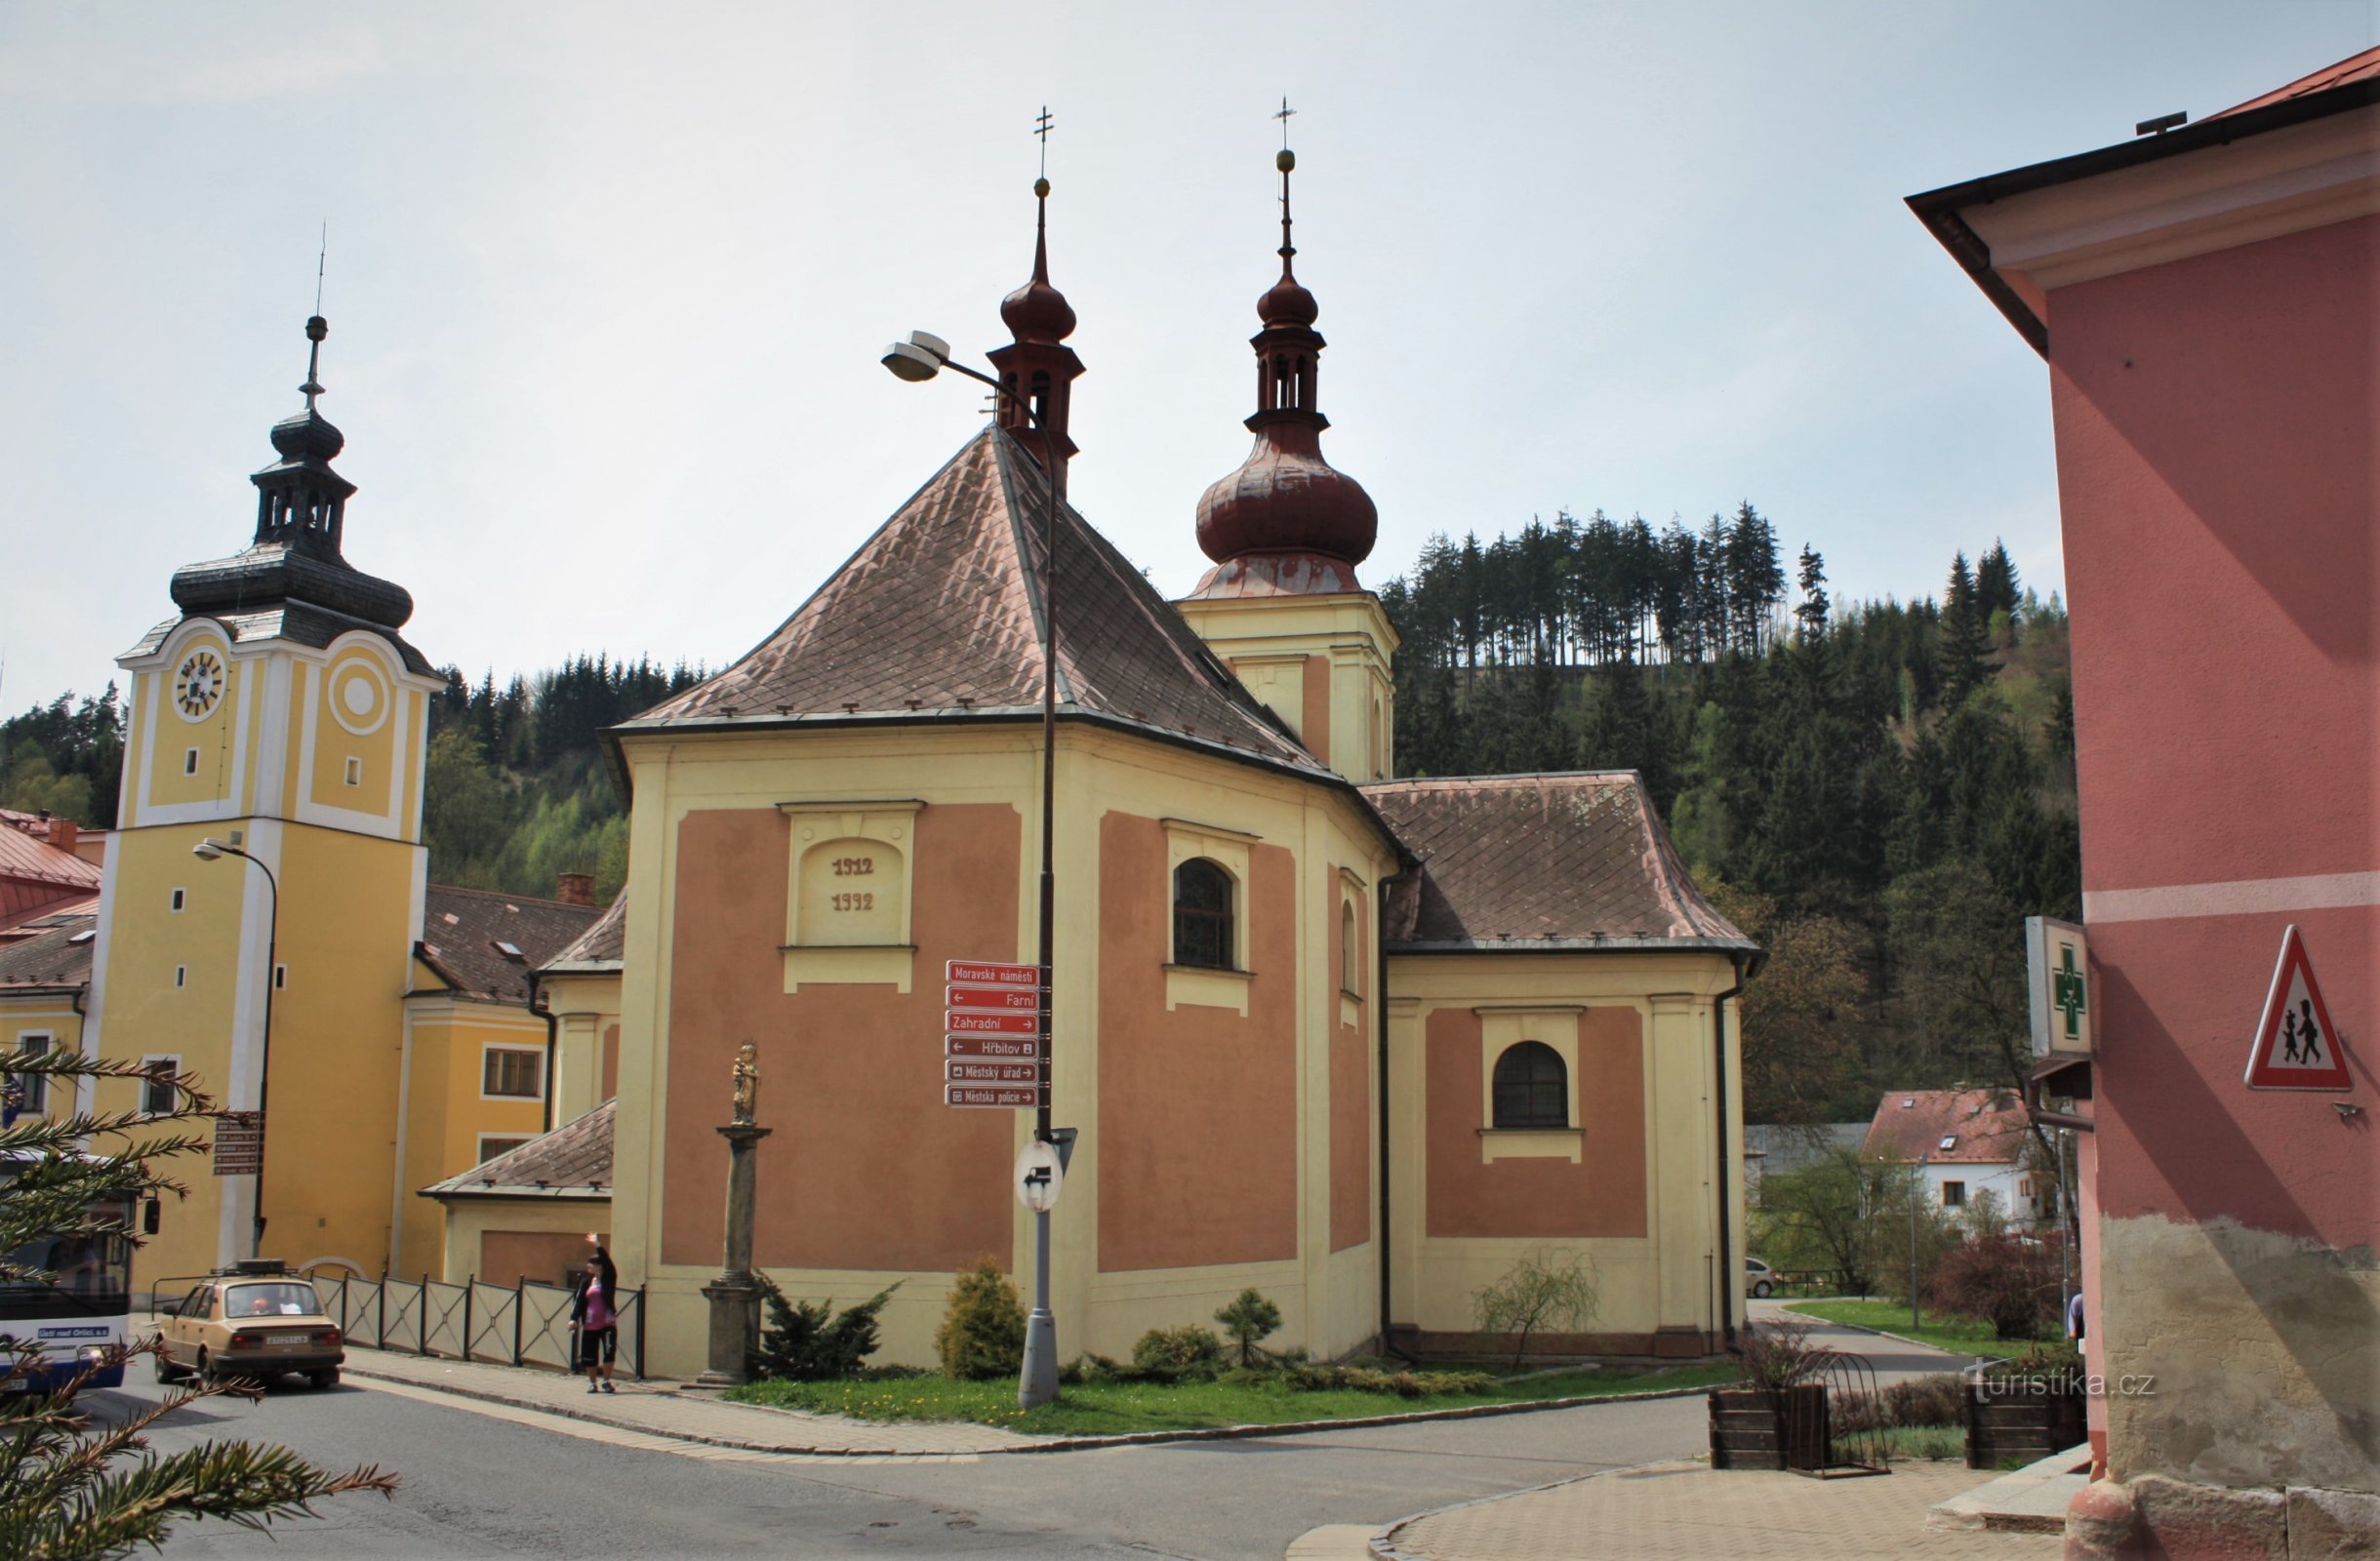 The town hall and the church of St. Bartholomew